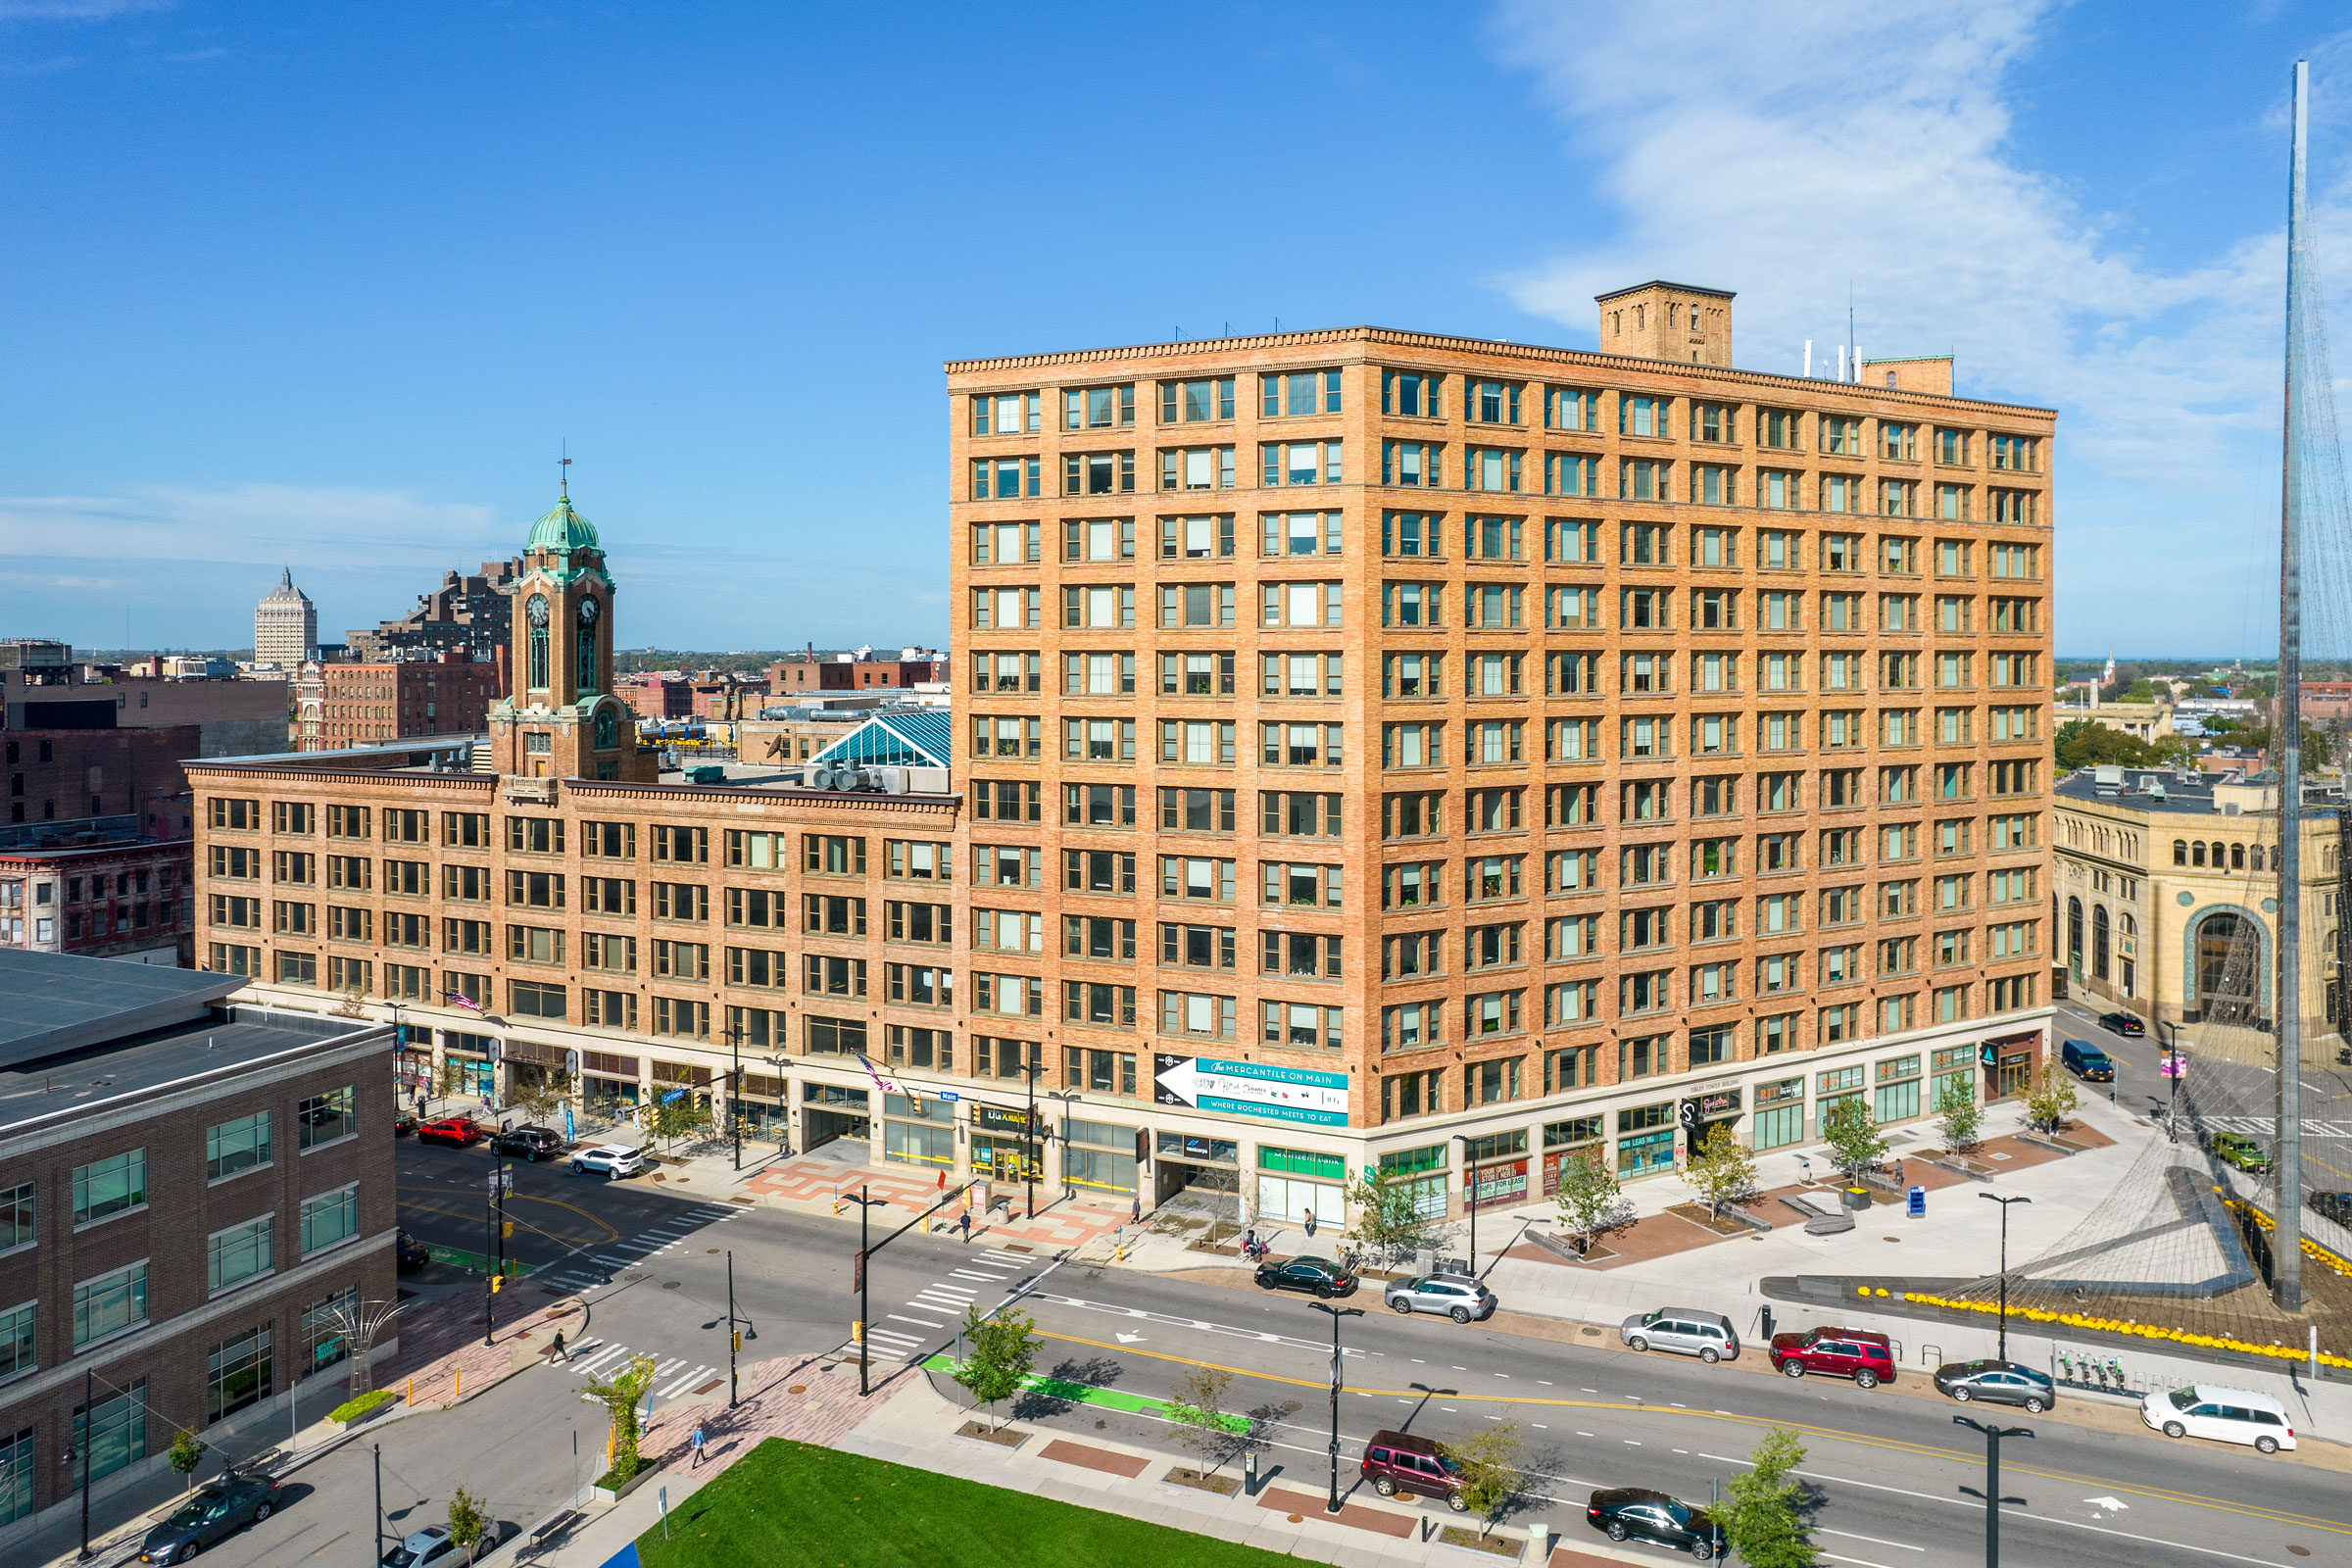 TAT’s Sibley Square Revitalization Demonstrates Adaptive Reuse at Scale